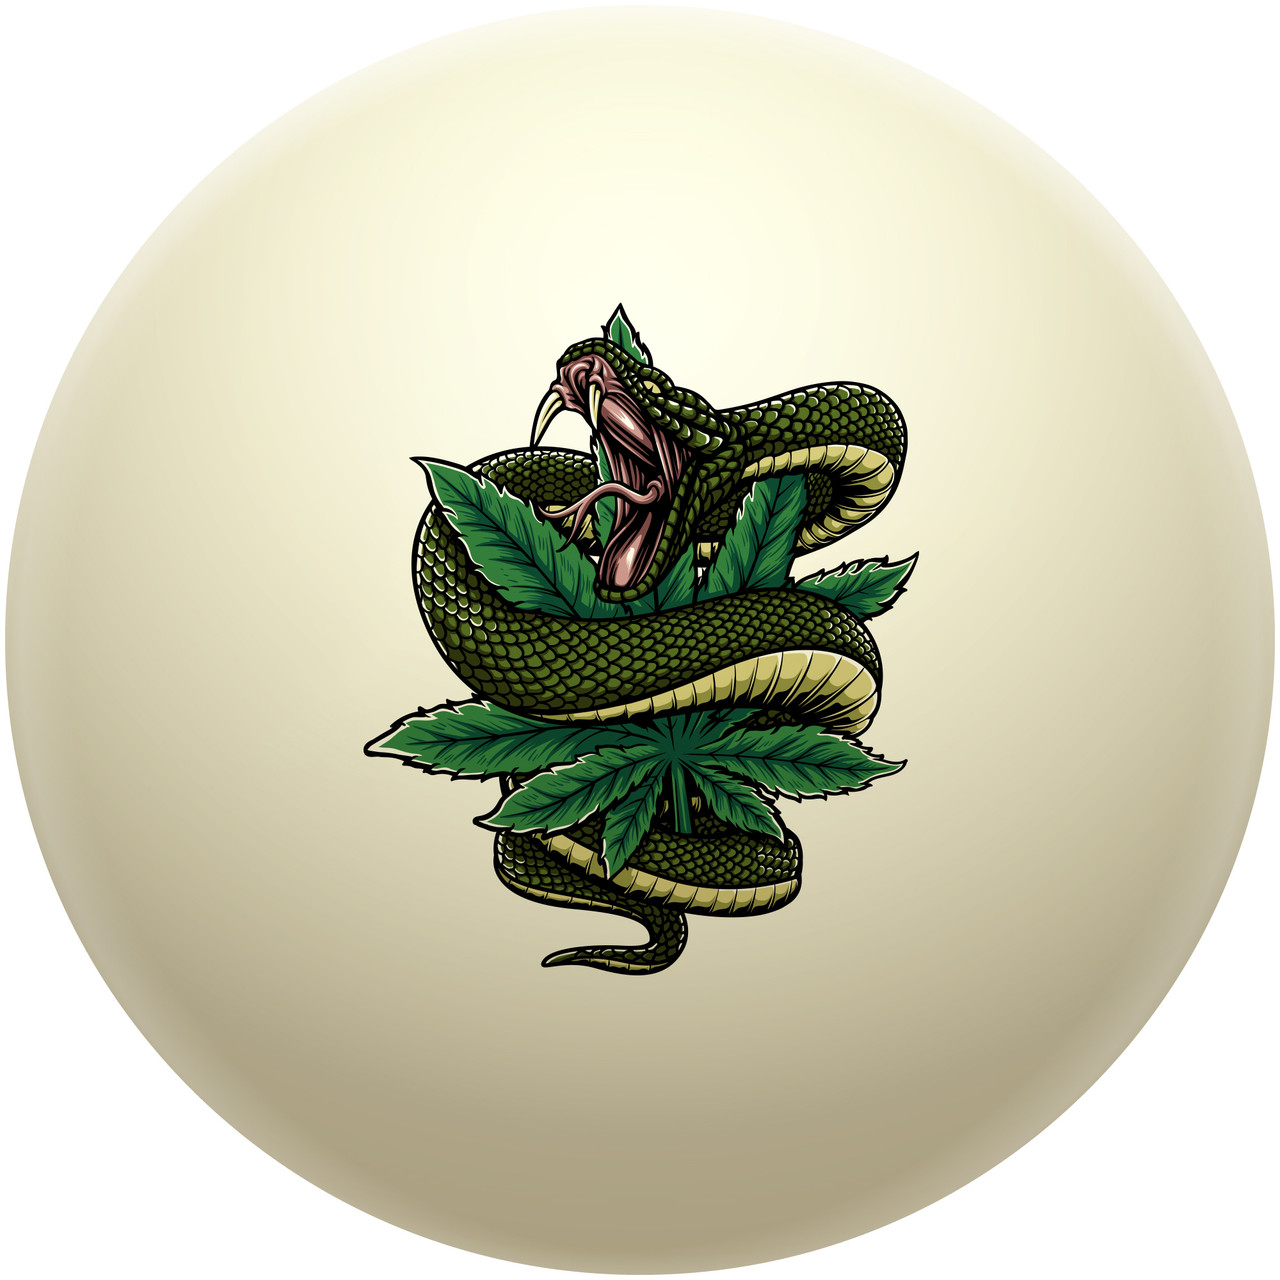 Dope Entwined Green Viper Cue Ball